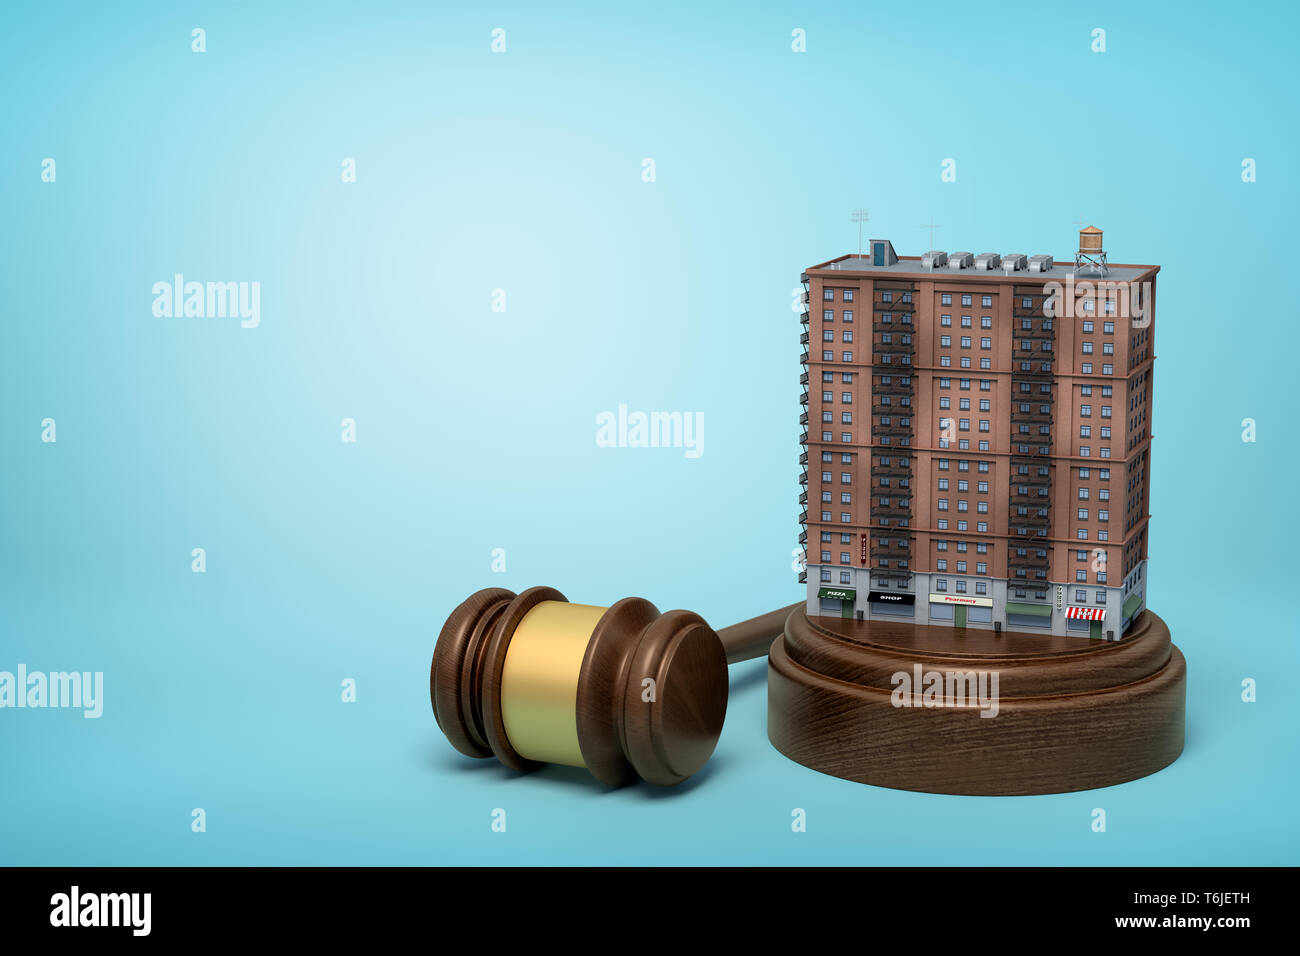 3d rendering of block of flats standing on sounding block with judge gavel lying beside on light-blue background. Stock Photo